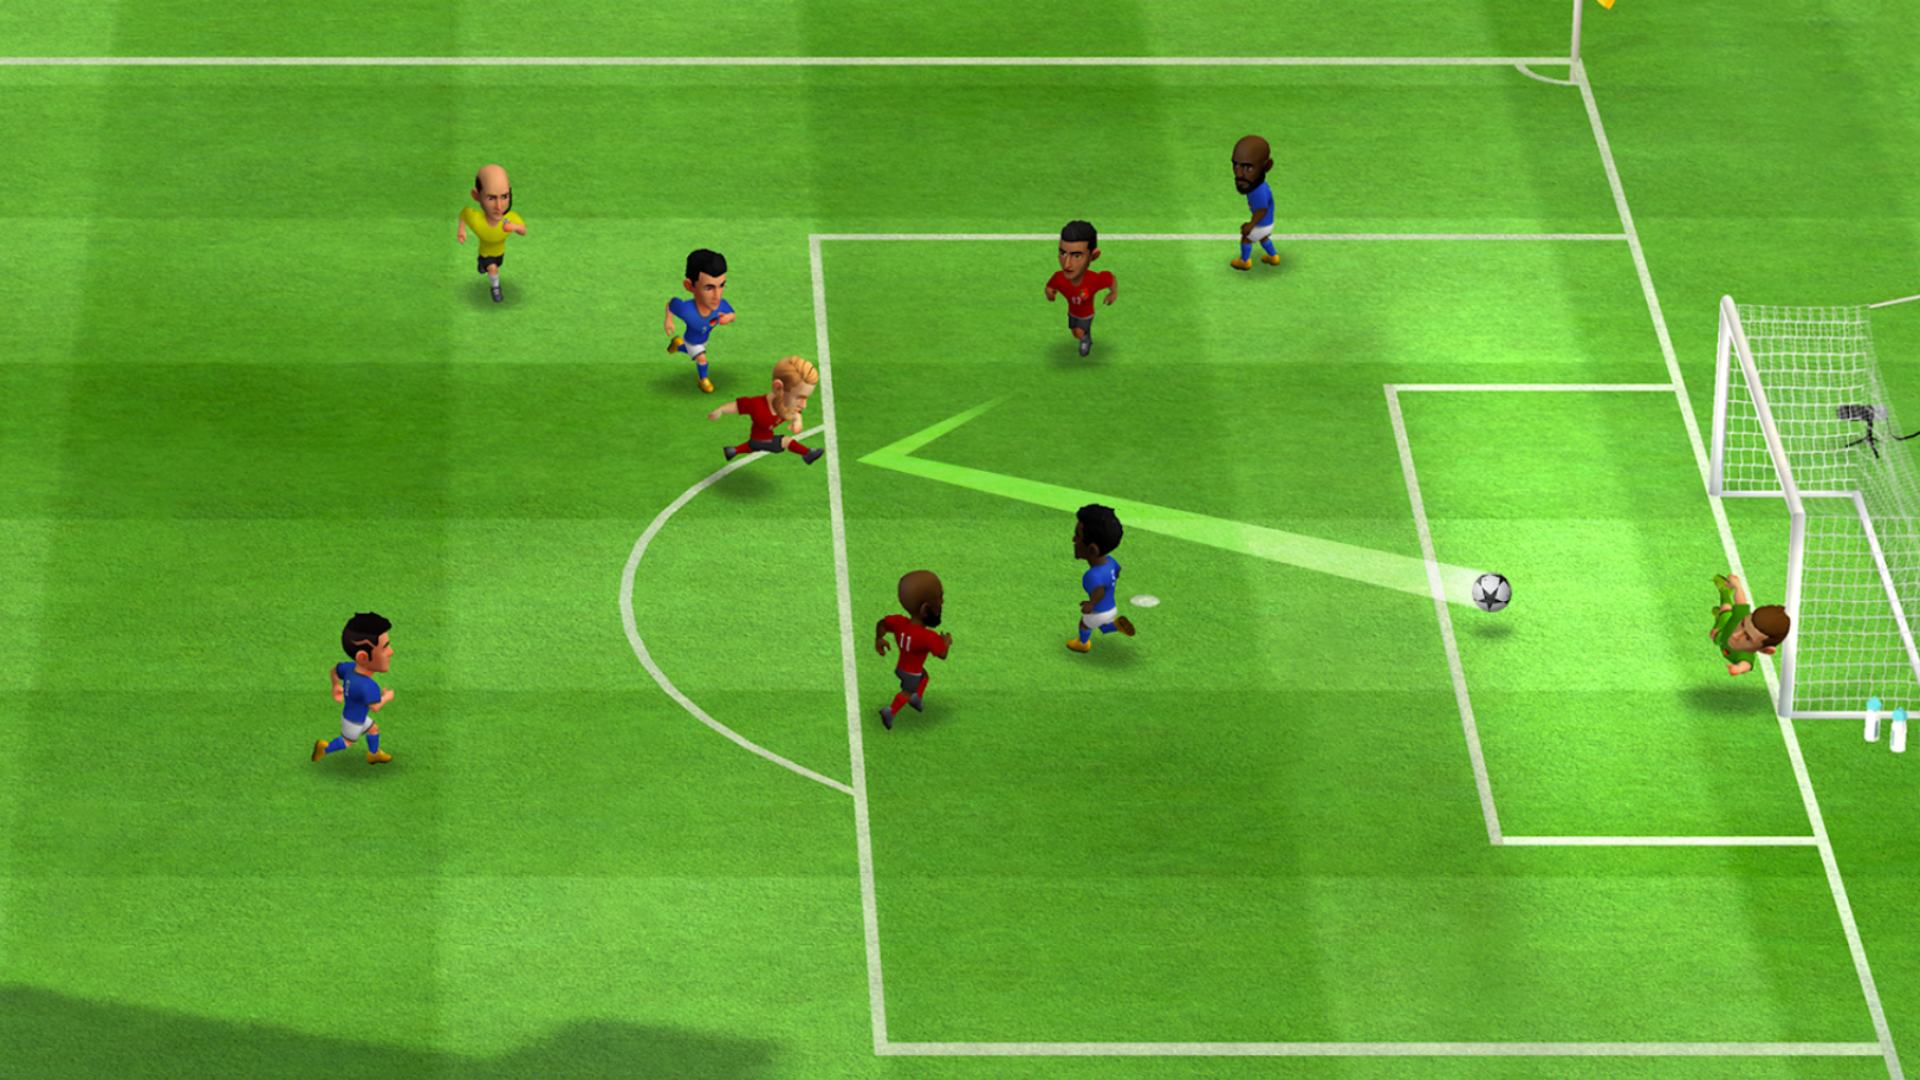 About: Mini Soccer Star 2023 (iOS App Store version)